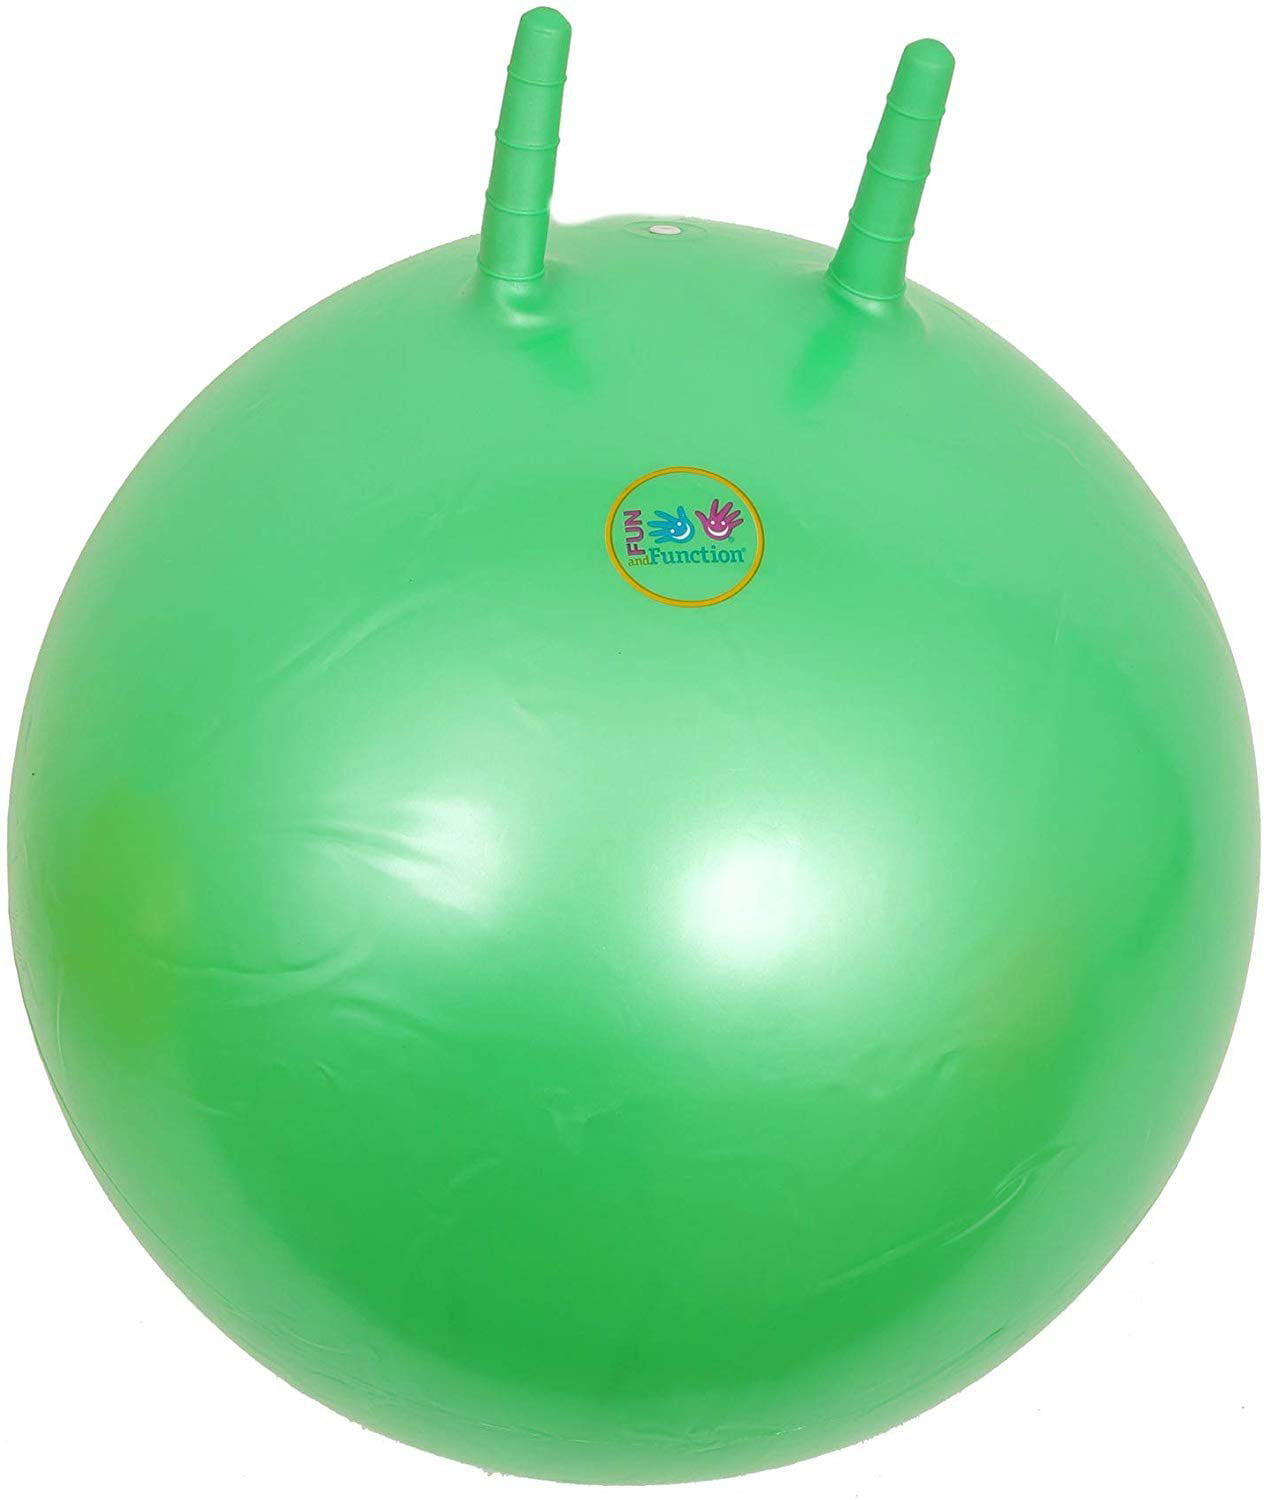 Socker Boppers Hippity Hop Kids Bouncy Ball With Handle 15" RARE Green Color for sale online 